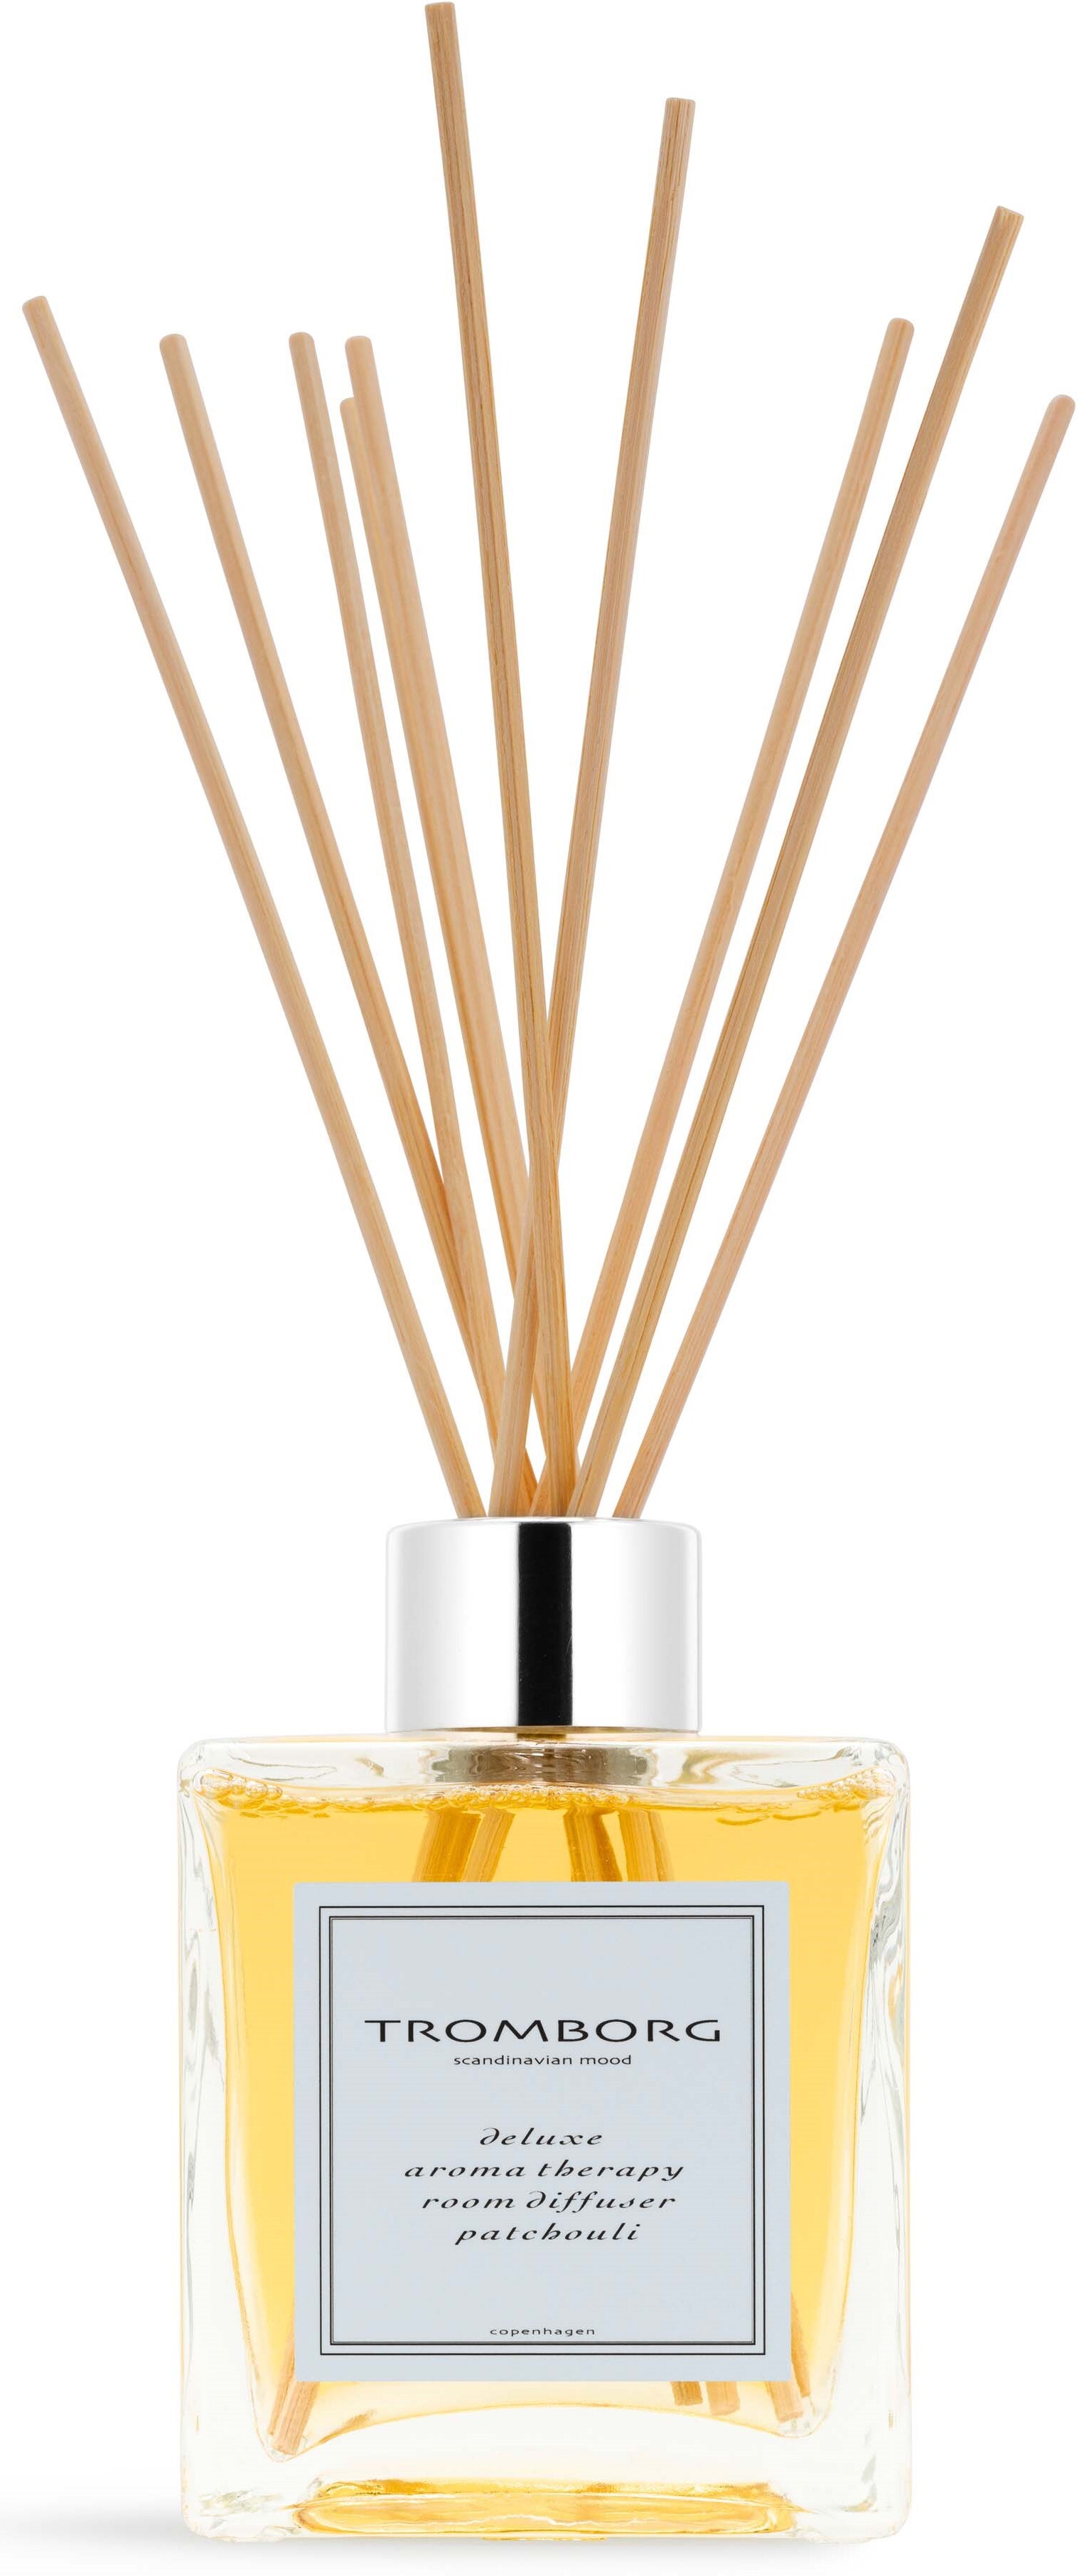 Tromborg Aroma Therapy Room Diffuser Patchouli 200 ml